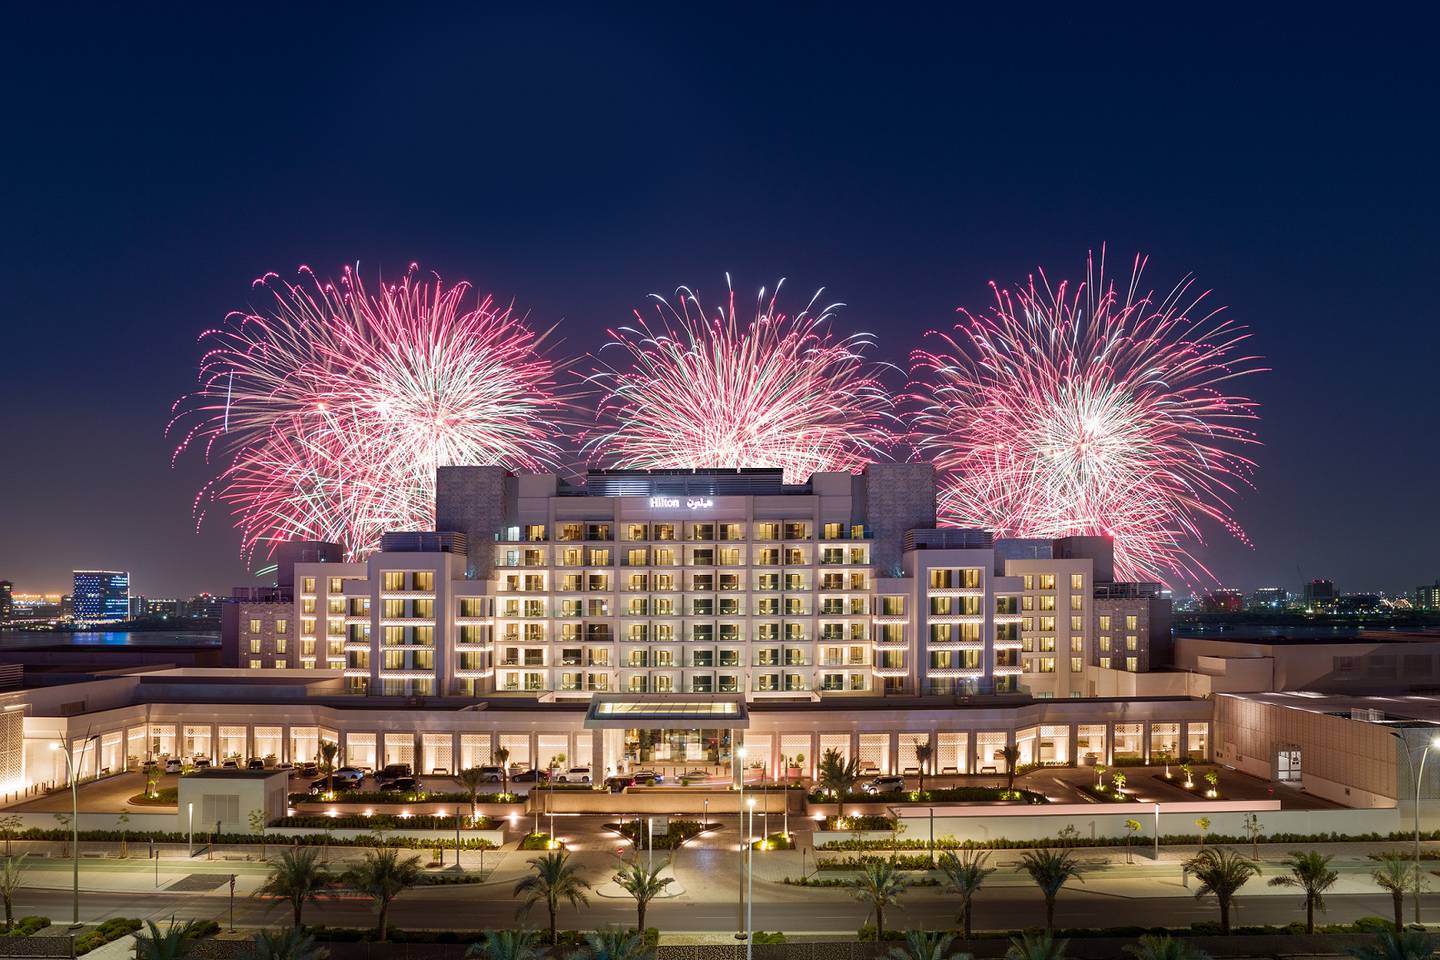 There will be two fireworks shows on Yas Island for New Year's Eve. Photo: Yas Island